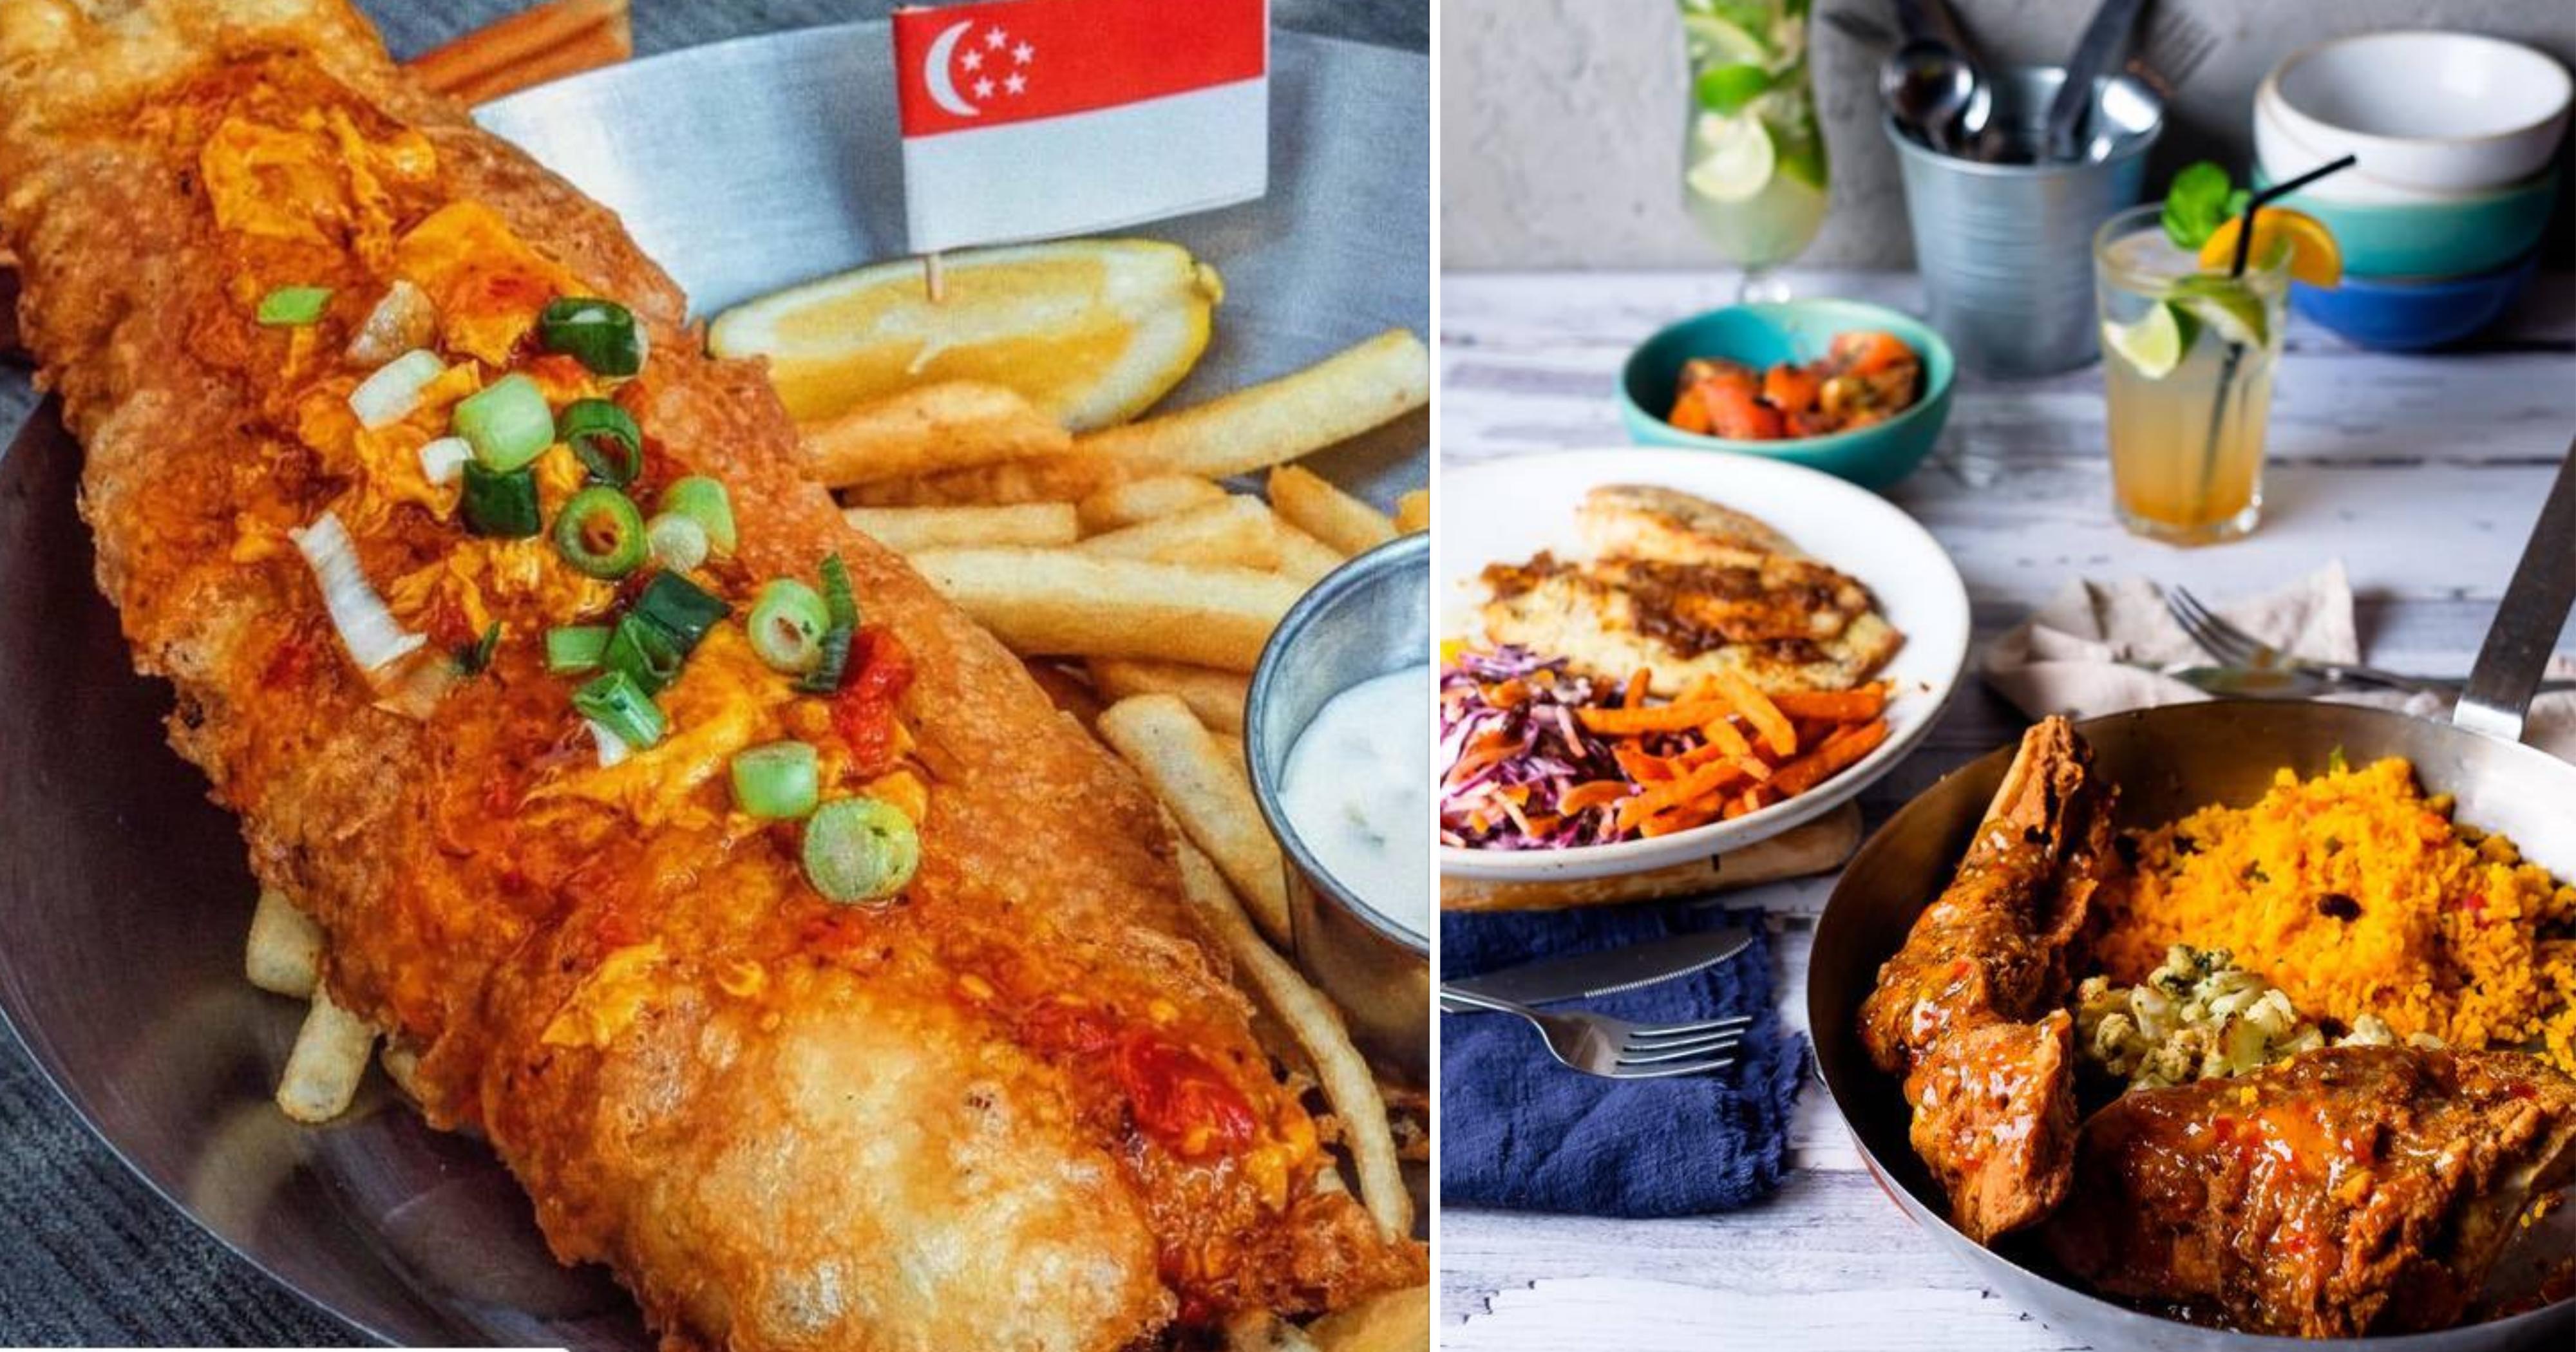 Fish & Co. S'pore is halal-certified again -  - News from  Singapore, Asia and around the world